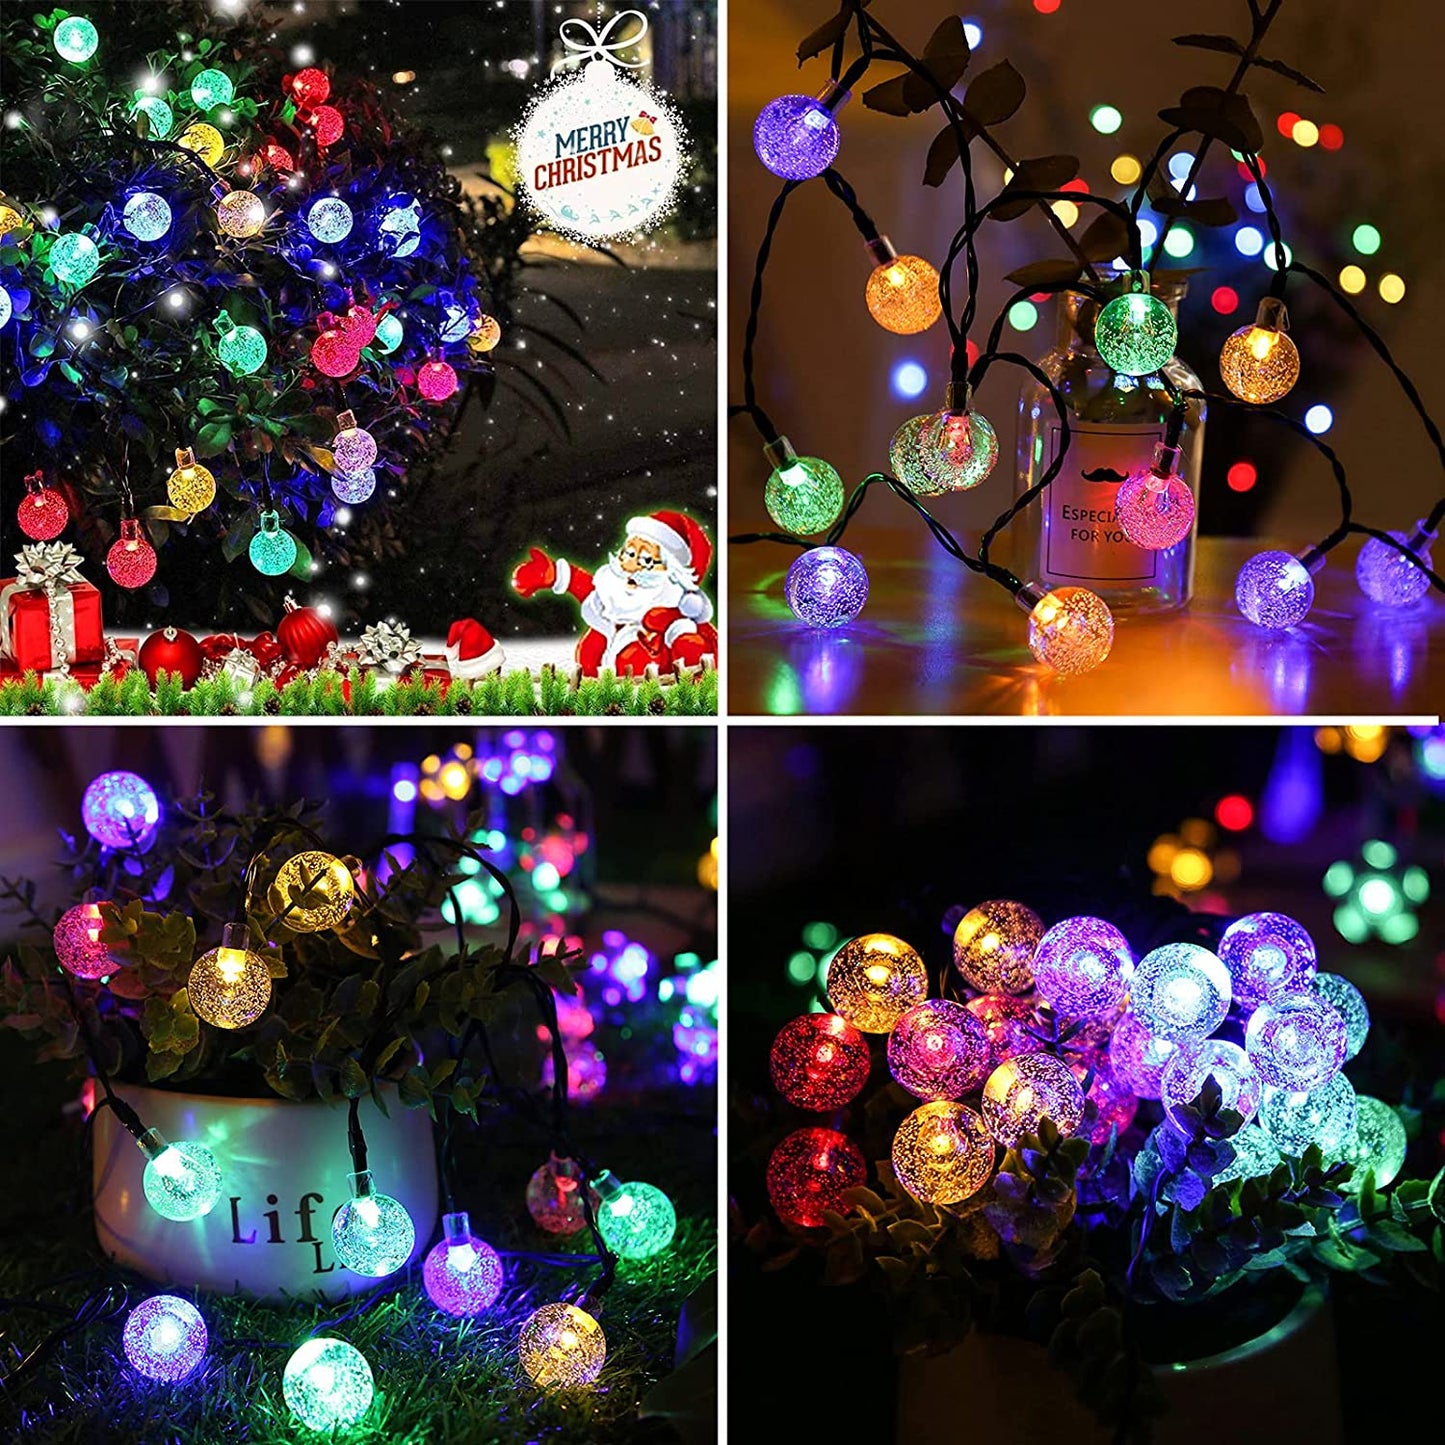 Solar String Lights Outdoor 100 Led 40 Feet Multi-Color Crystal Globe Lights with 8 Lighting Modes, Waterproof Solar Powered Patio Lights for Garden Yard Porch Wedding Party Decoration